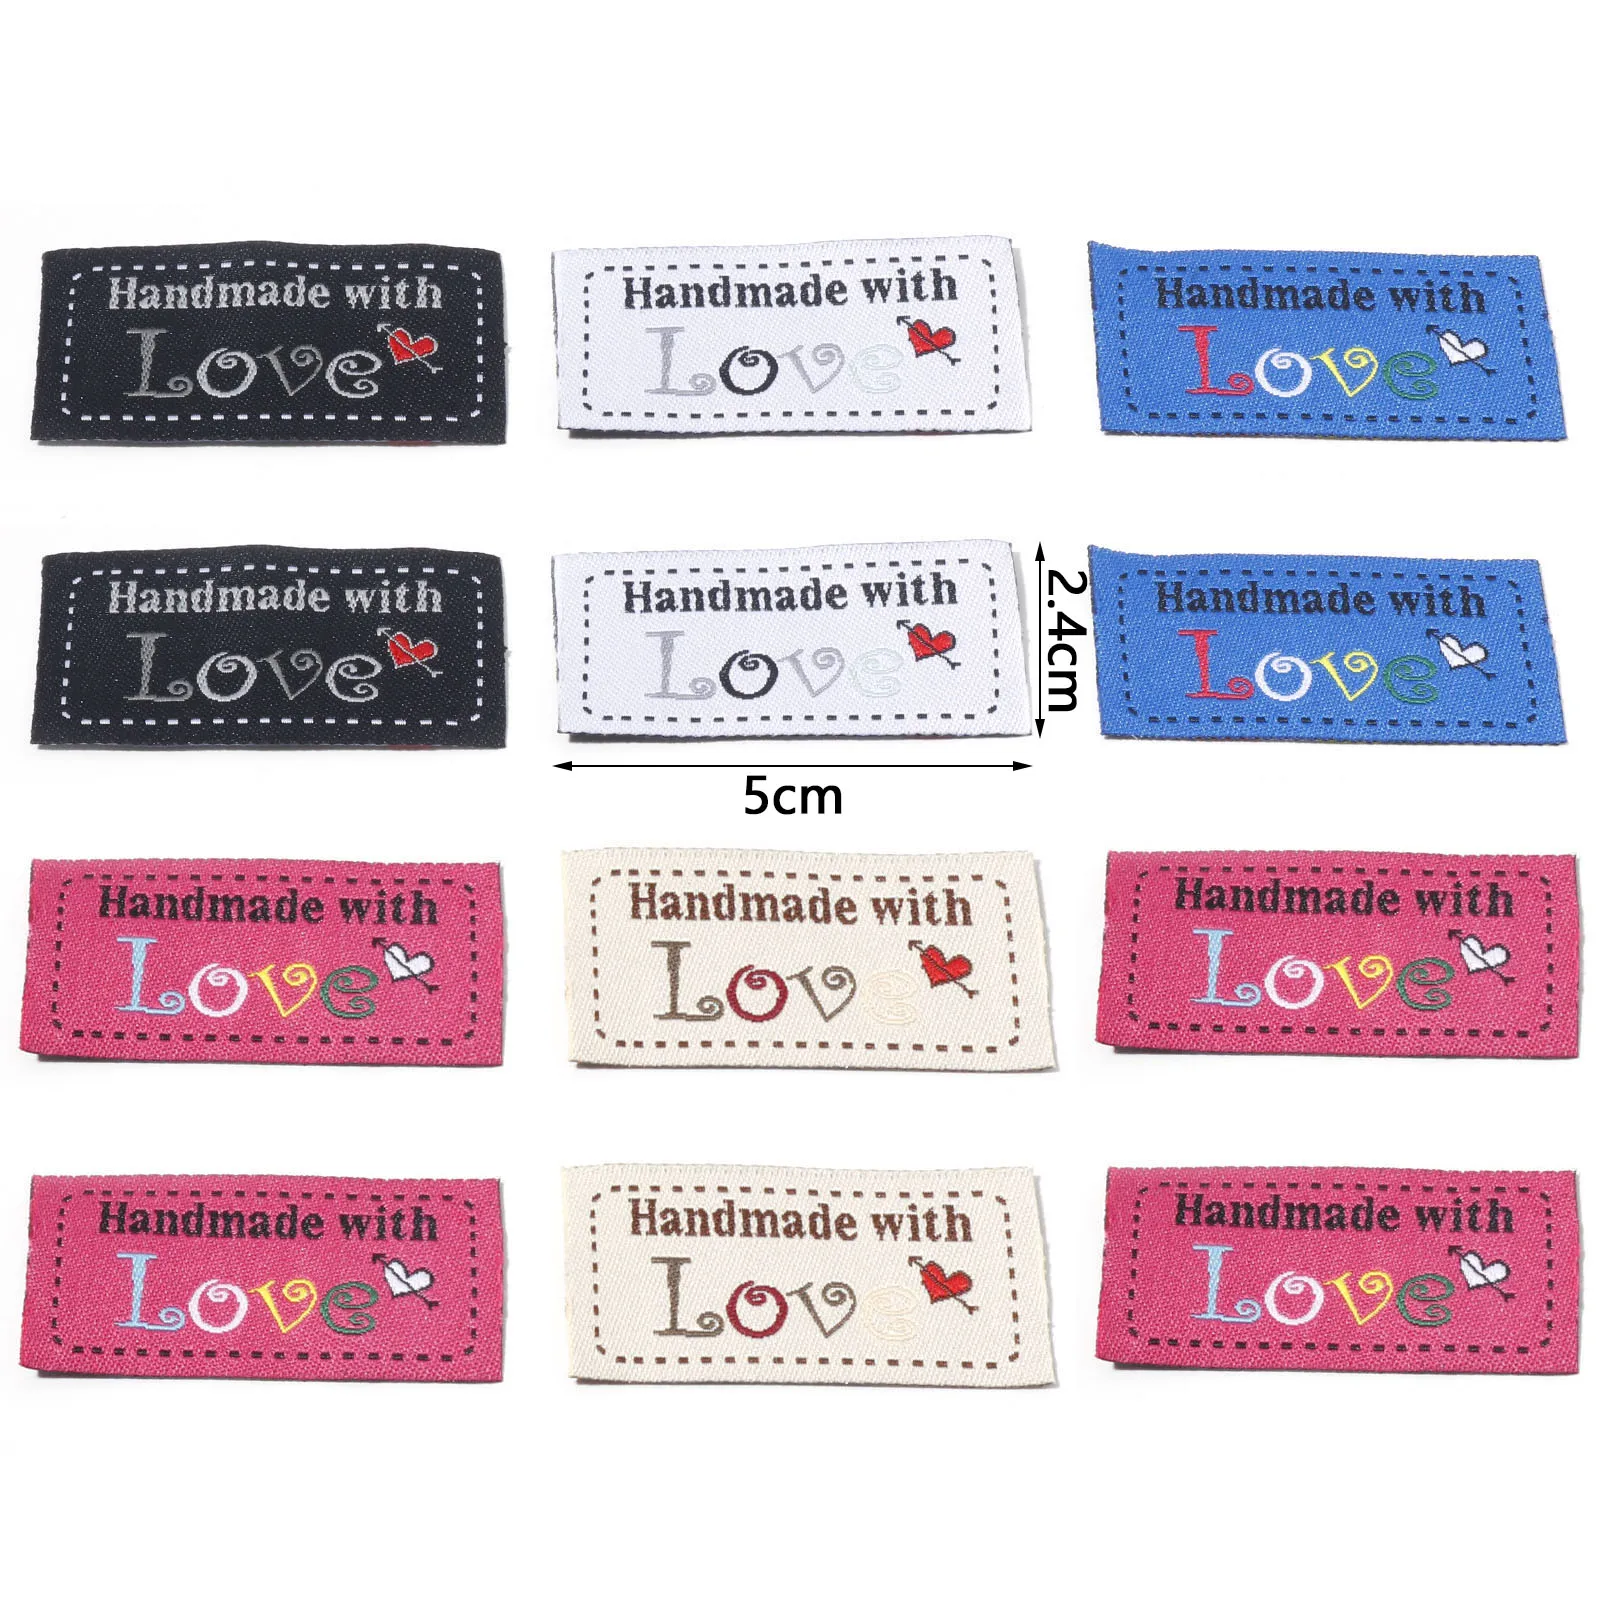 50pcs/pack Heart Washable Cloth Clothing Labels Hand Made Printed Diy Craft  Sewing Bags Shoes Tags Decoration Material - Garment Labels - AliExpress